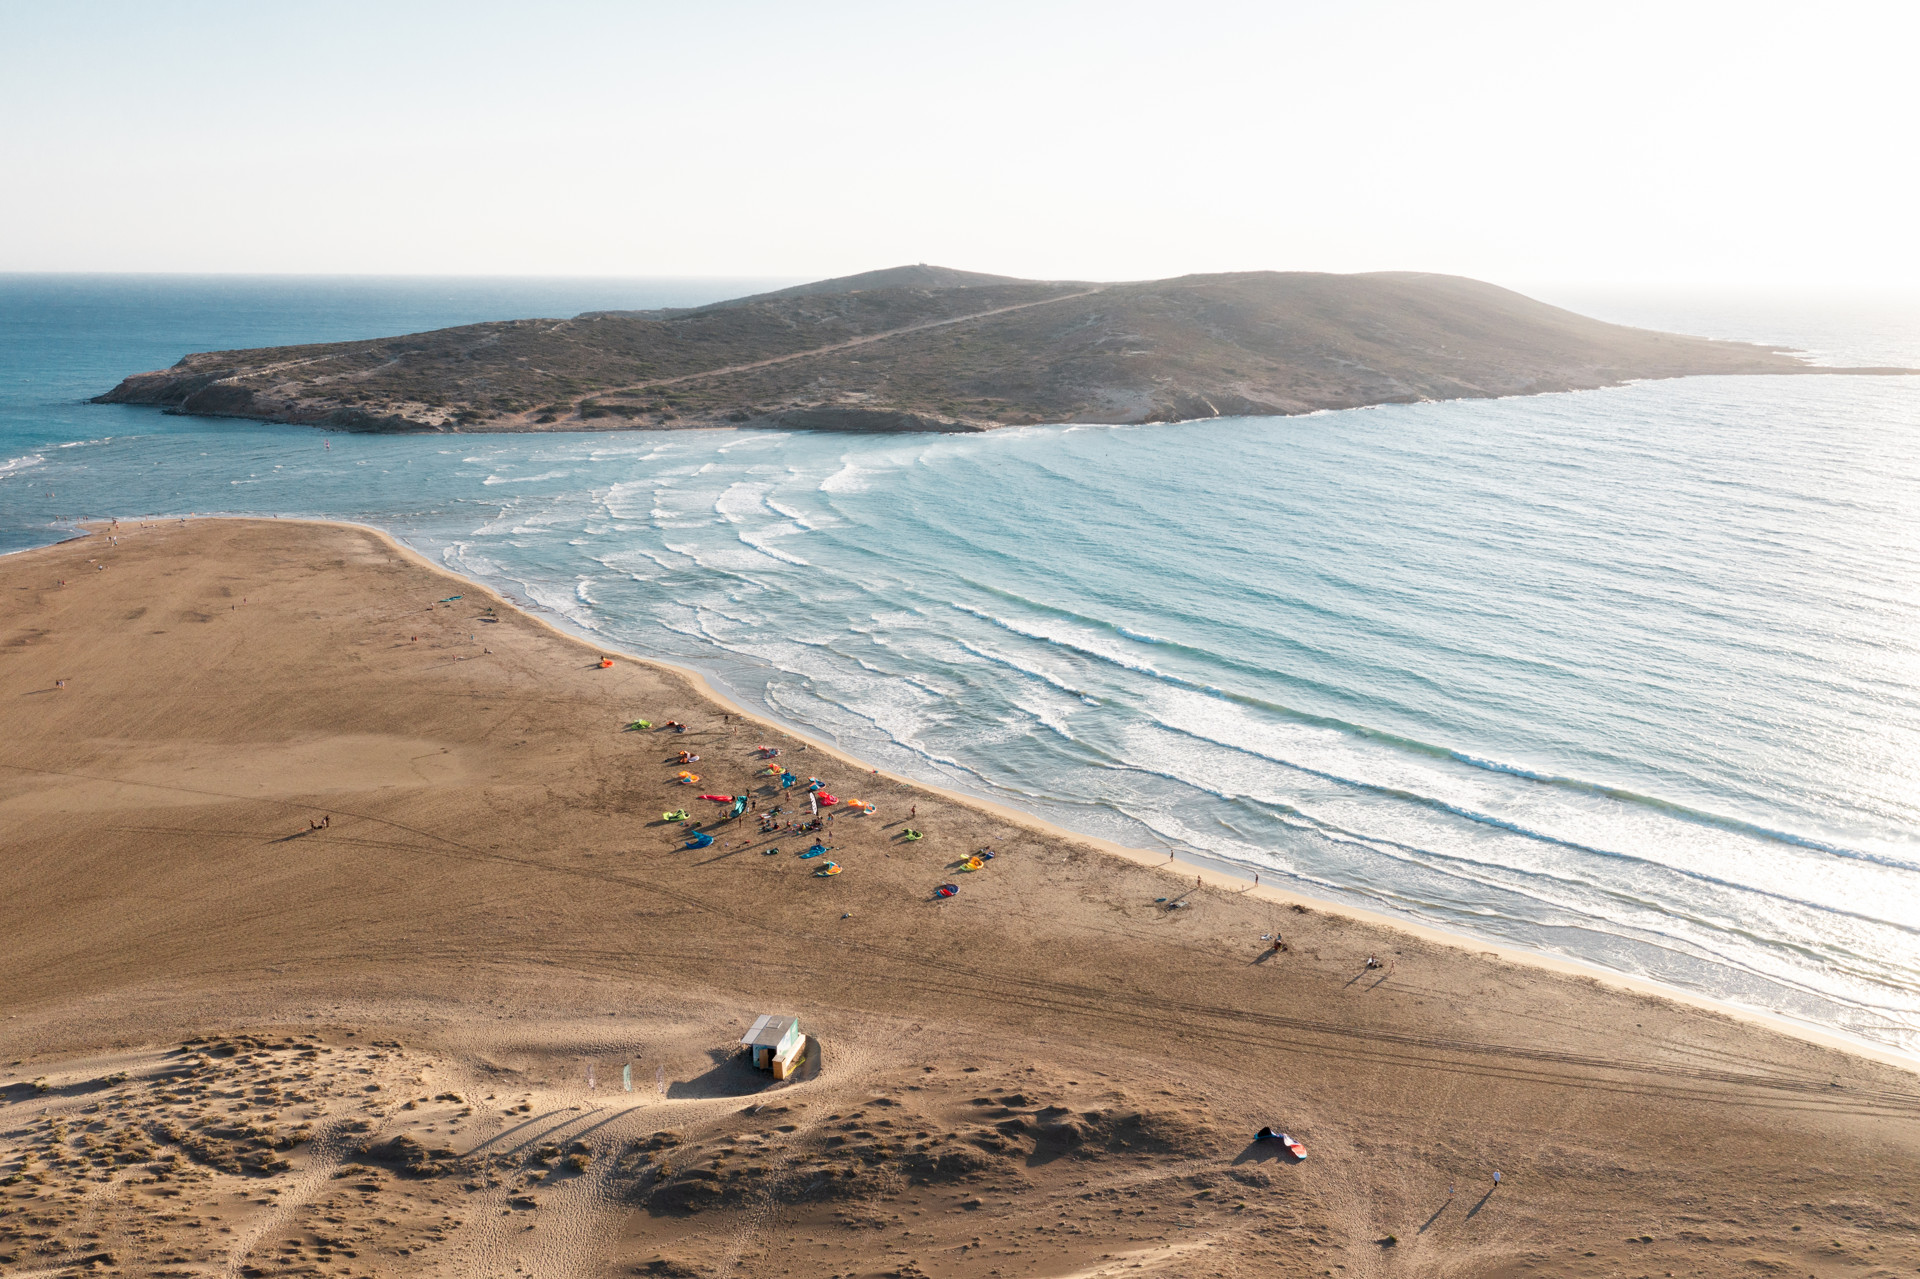 If you are into windsurfing or kitesurfing, Prasonisi beach in Rhodes has your name on it